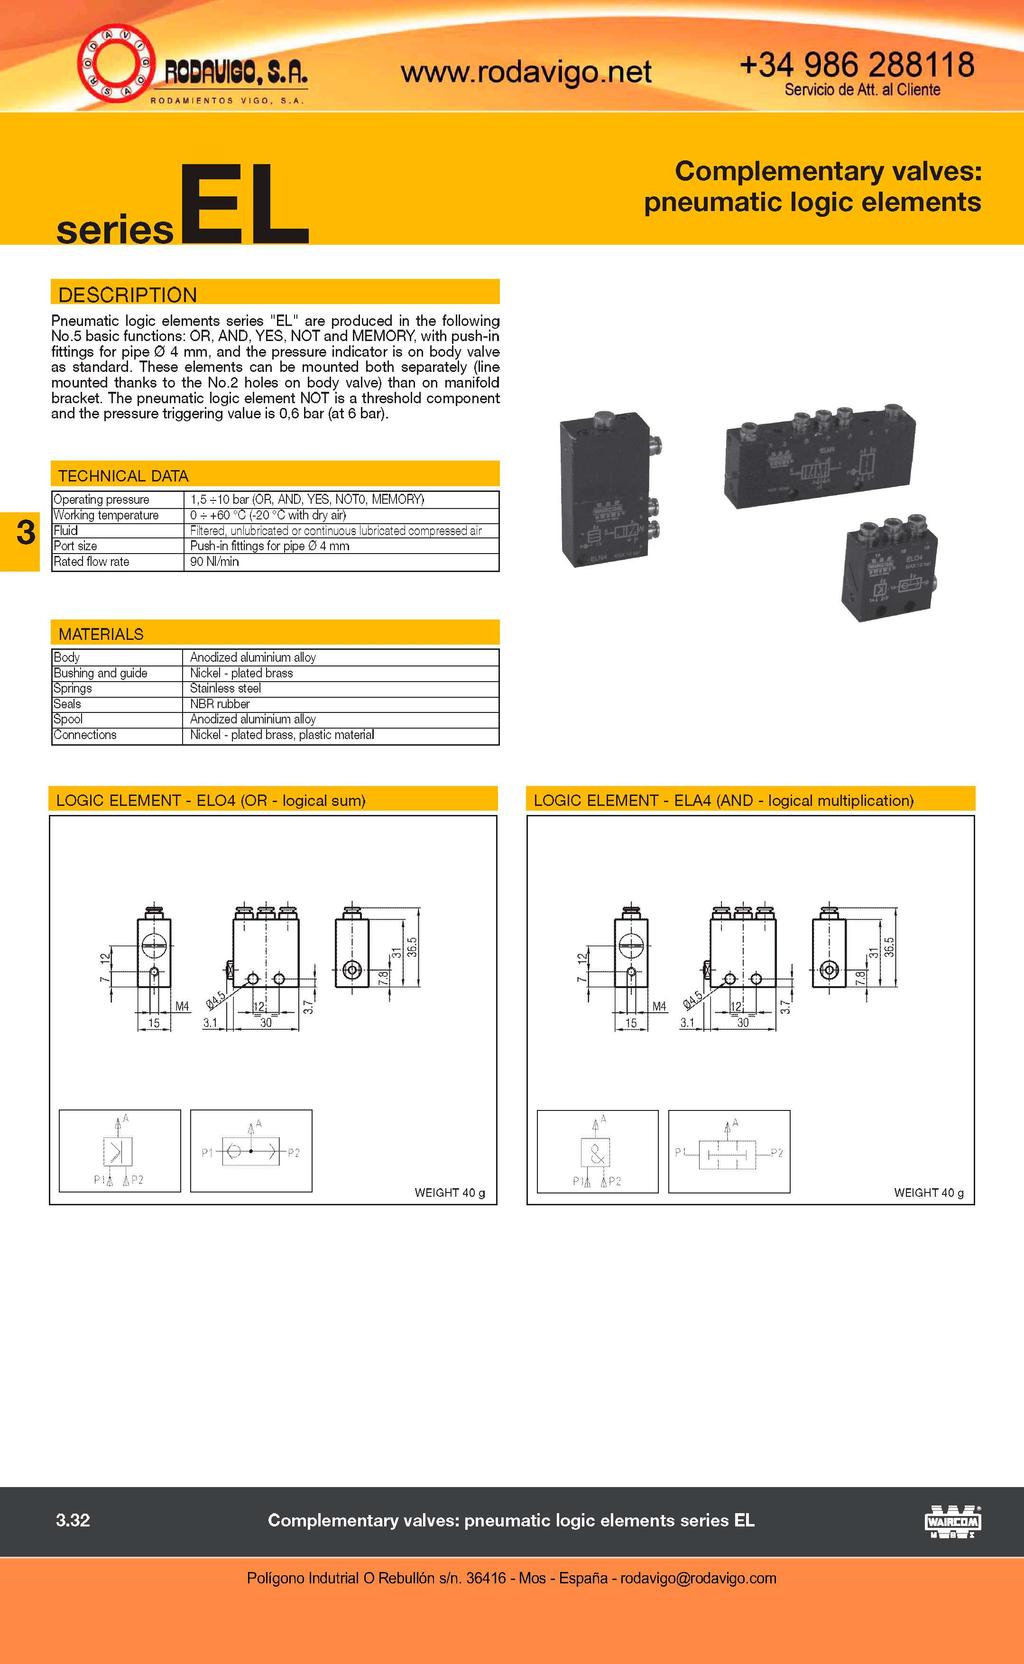 pneumatic logic elements Pneumatic logic elements series "EL" are produced in the following No.